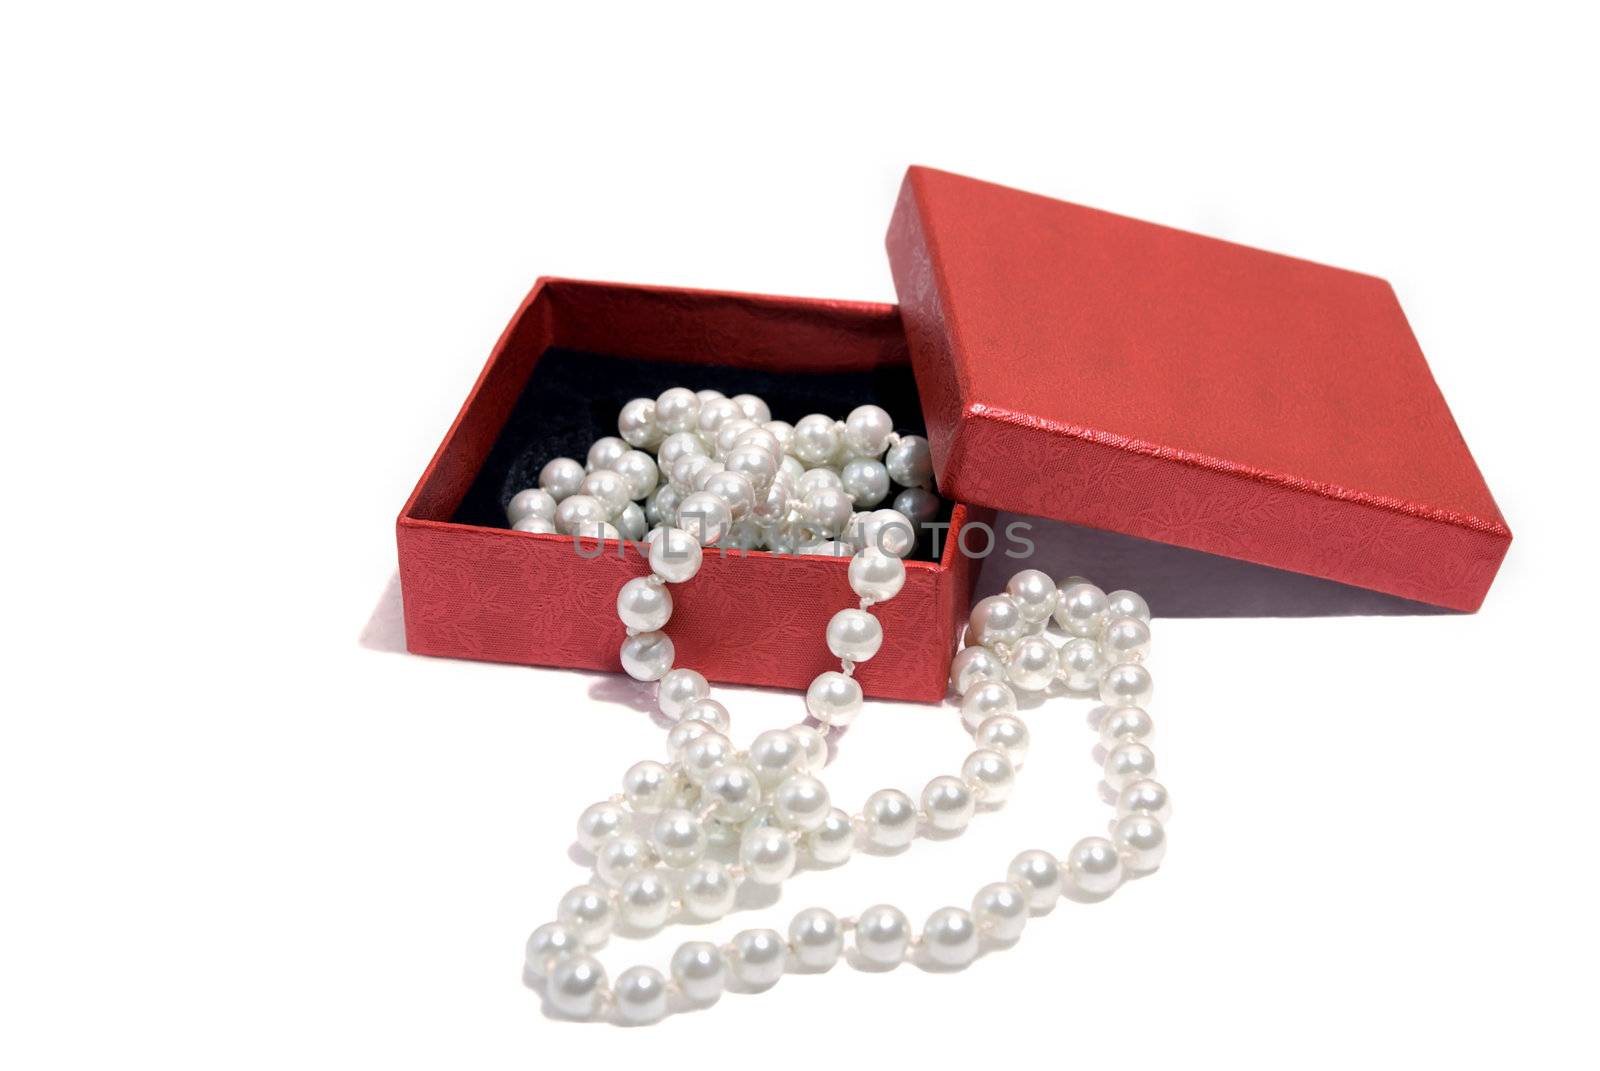 Necklace pearls in a gift box isolated on white background.